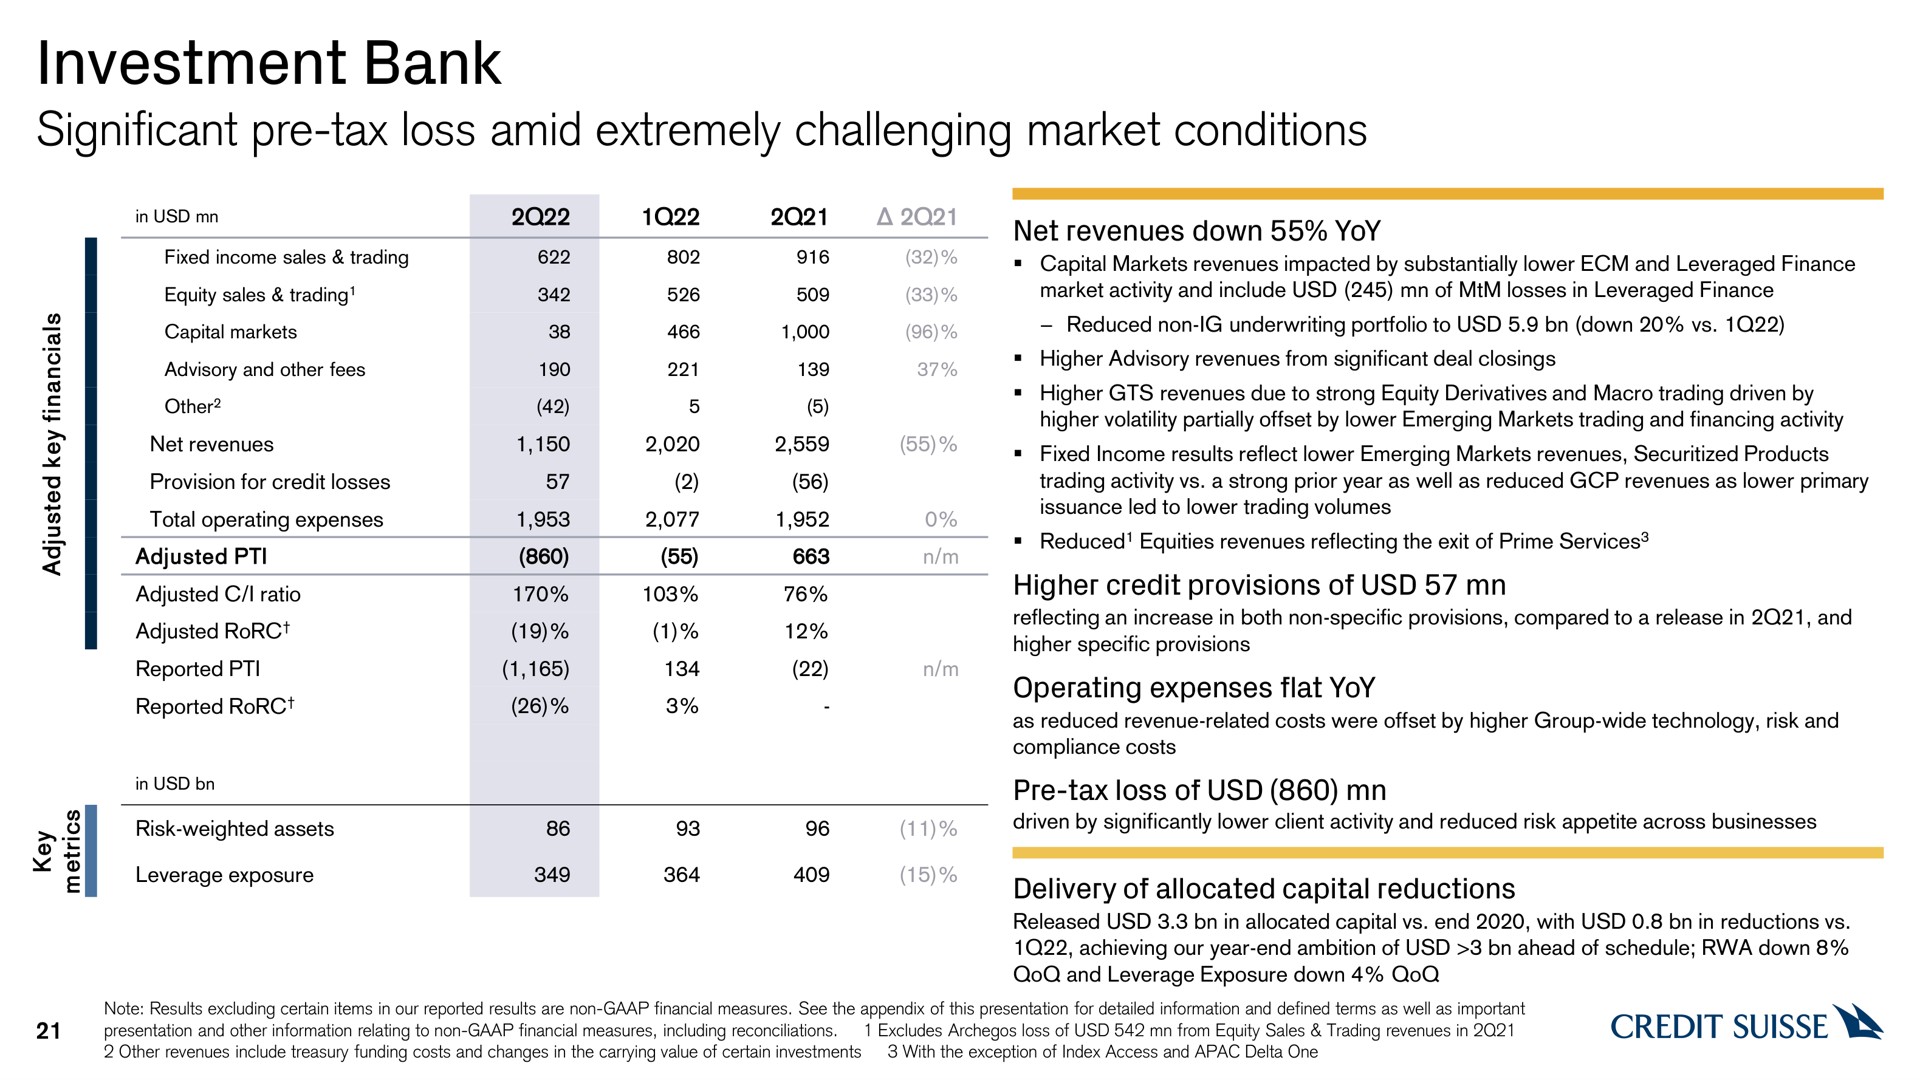 investment bank significant tax loss amid extremely challenging market conditions | Credit Suisse